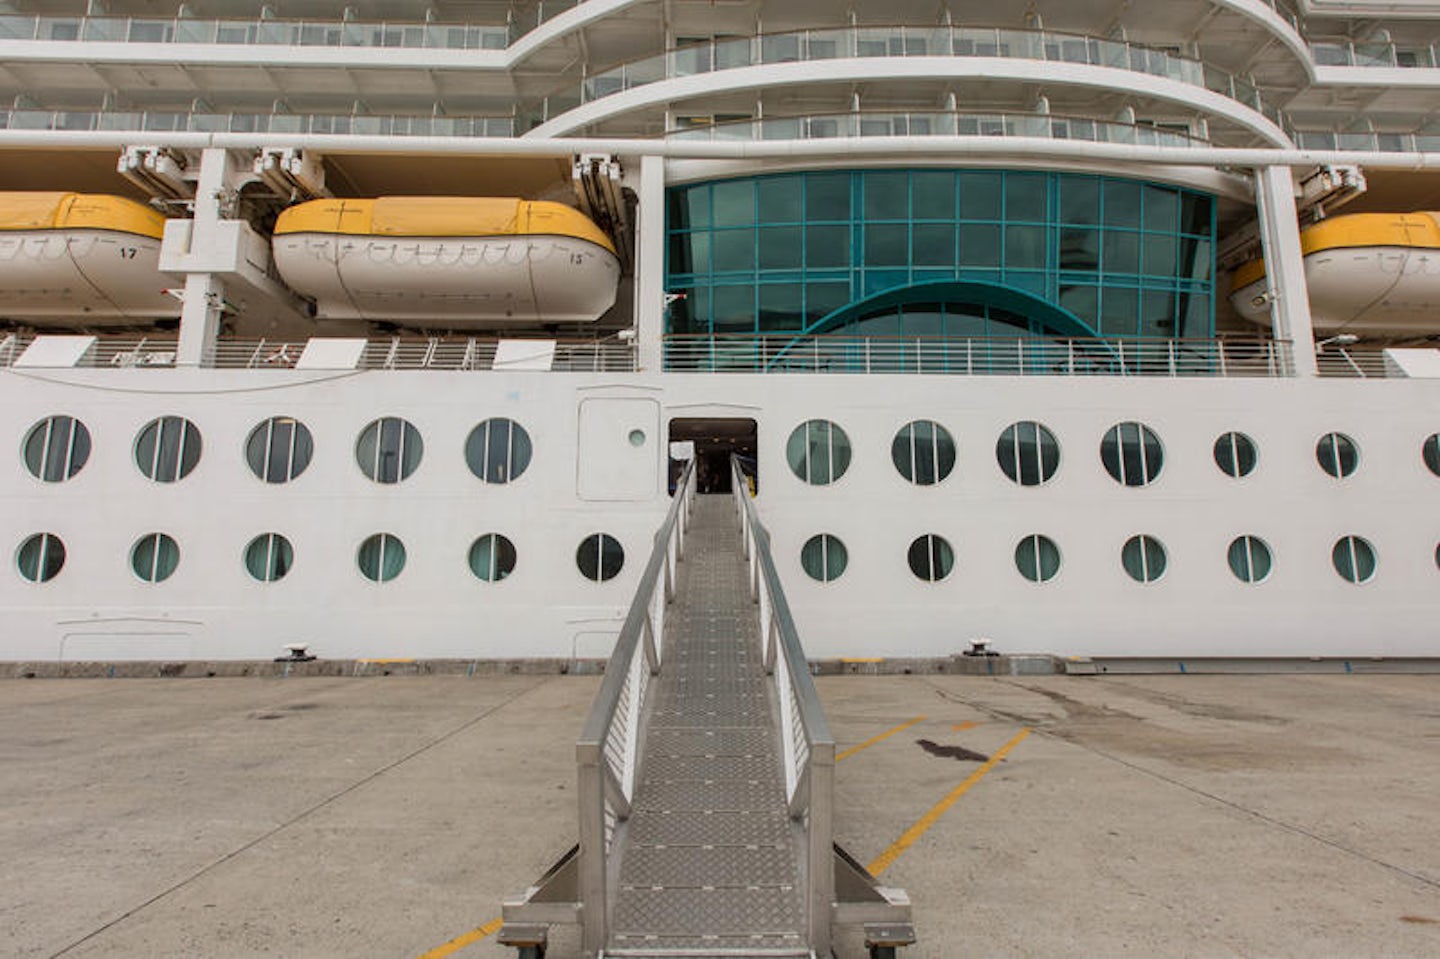 Boarding & Disembarkment on Radiance of the Seas